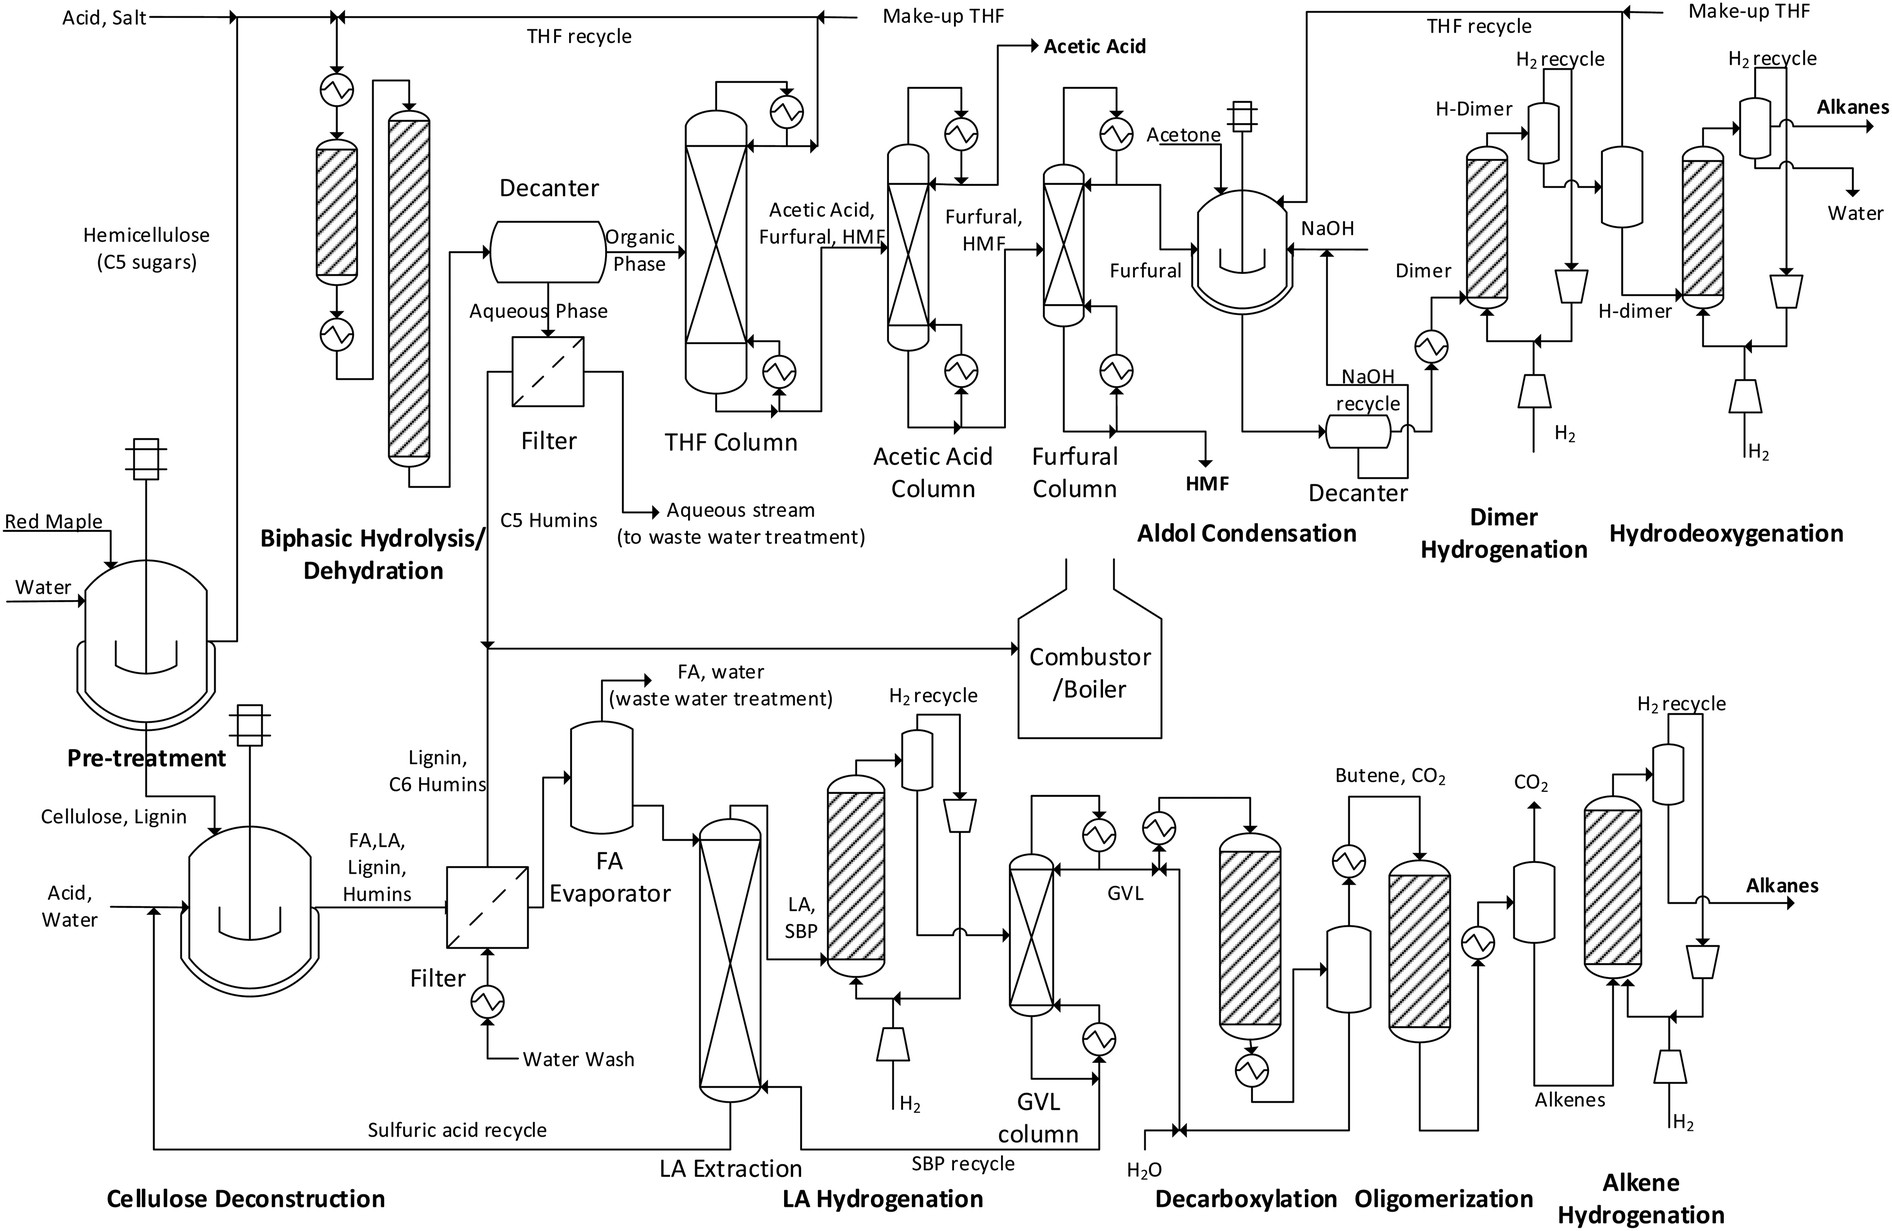 Chemical Engineering Process Flow Diagram Production Of Renewable Jet Fuel Range Alkanes and Modity Of Chemical Engineering Process Flow Diagram